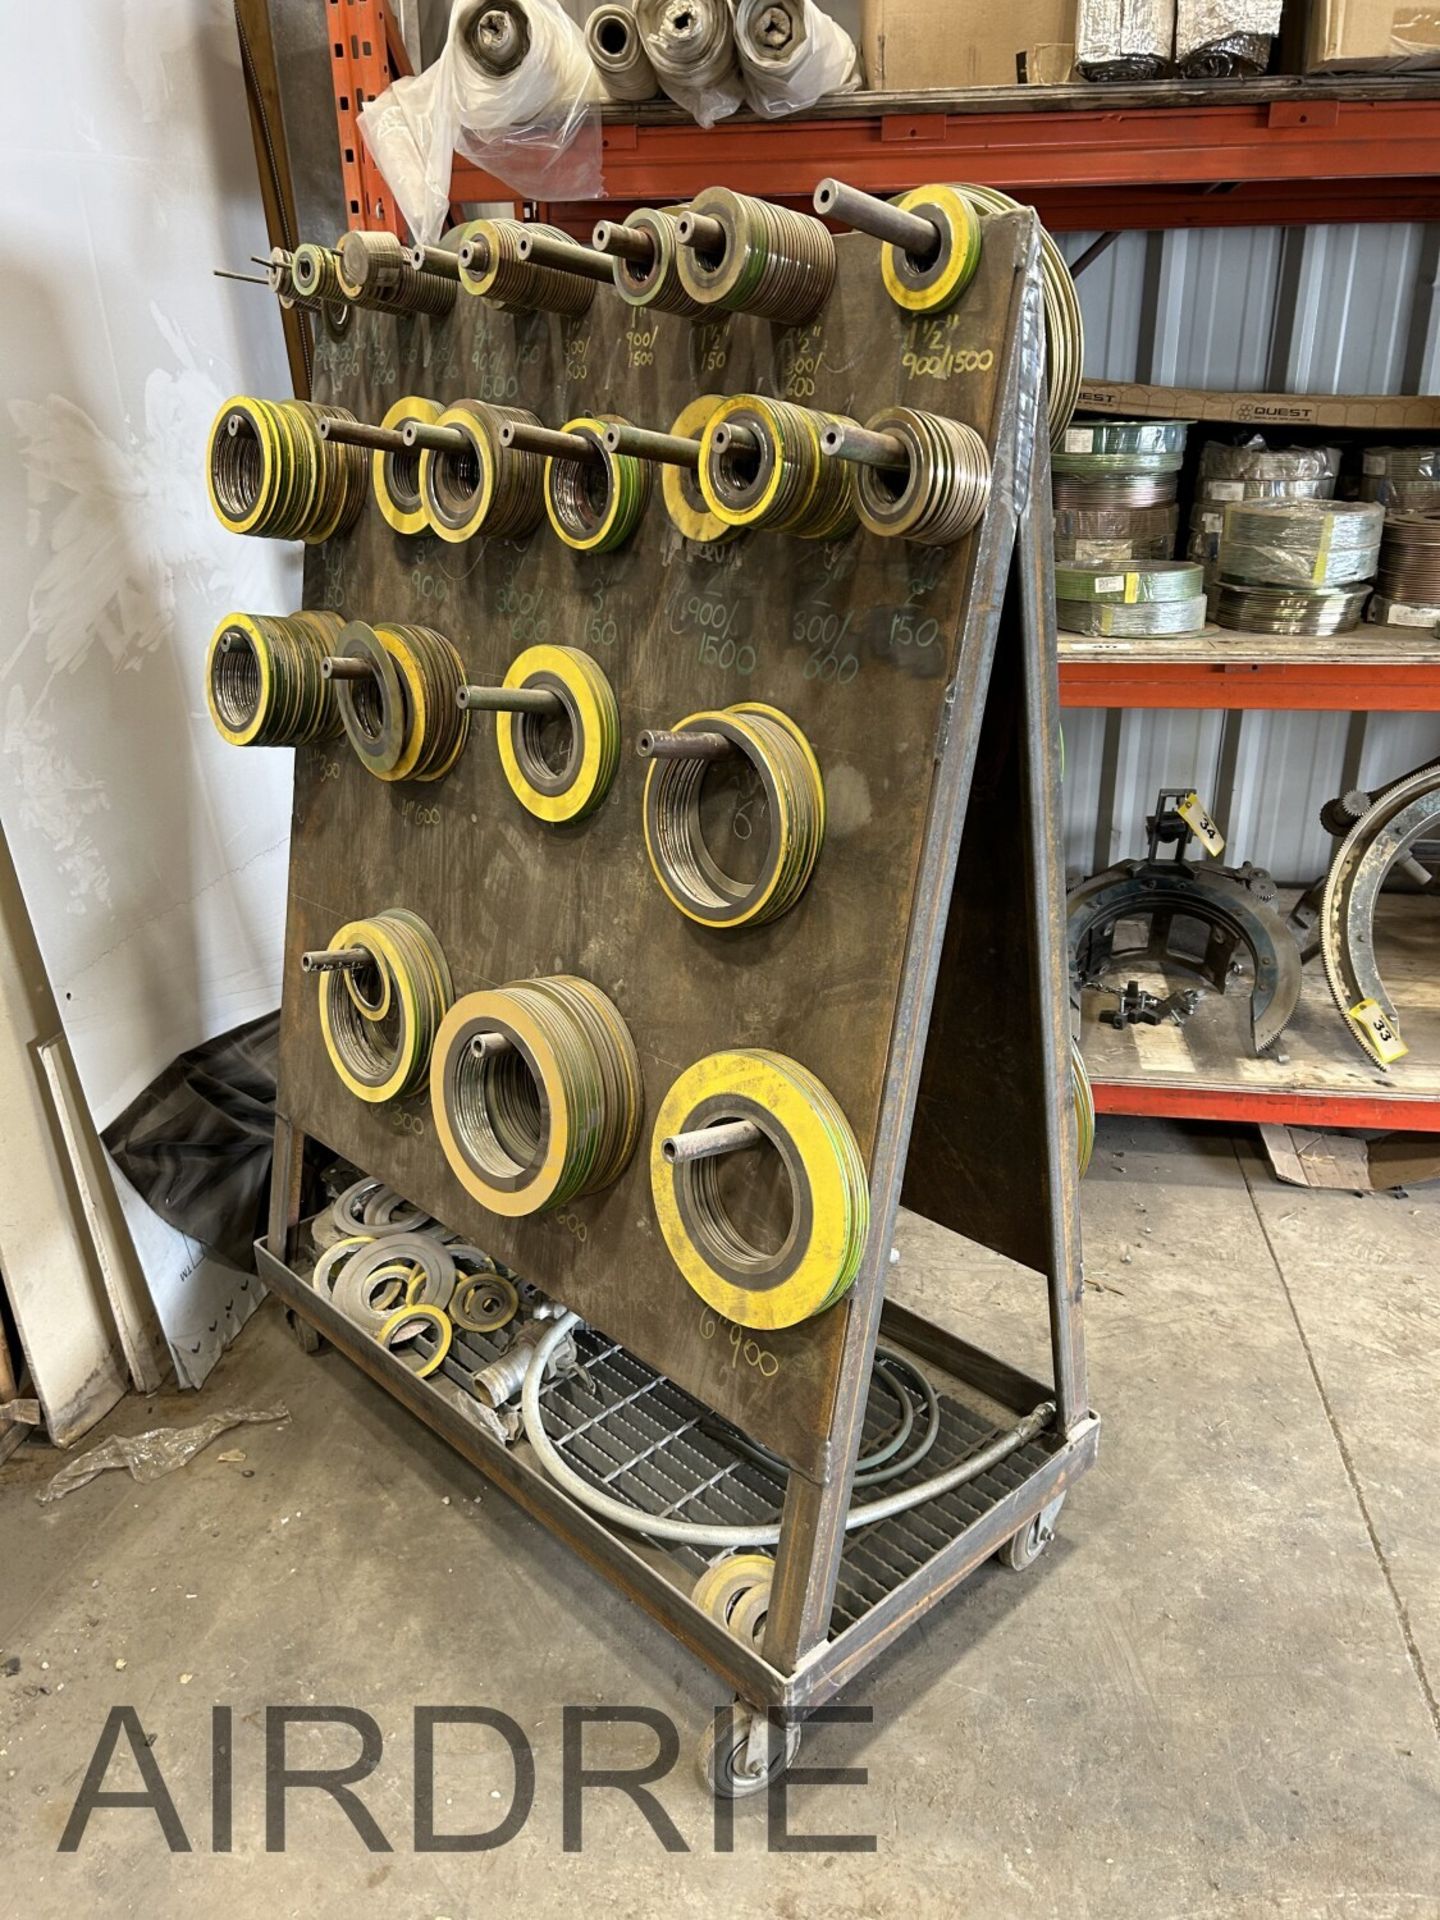 *OFFSITE* L/O ASSORTED SPIRAL WOUND GASKETS ON ROLLING A-FRAME CART - Image 3 of 5